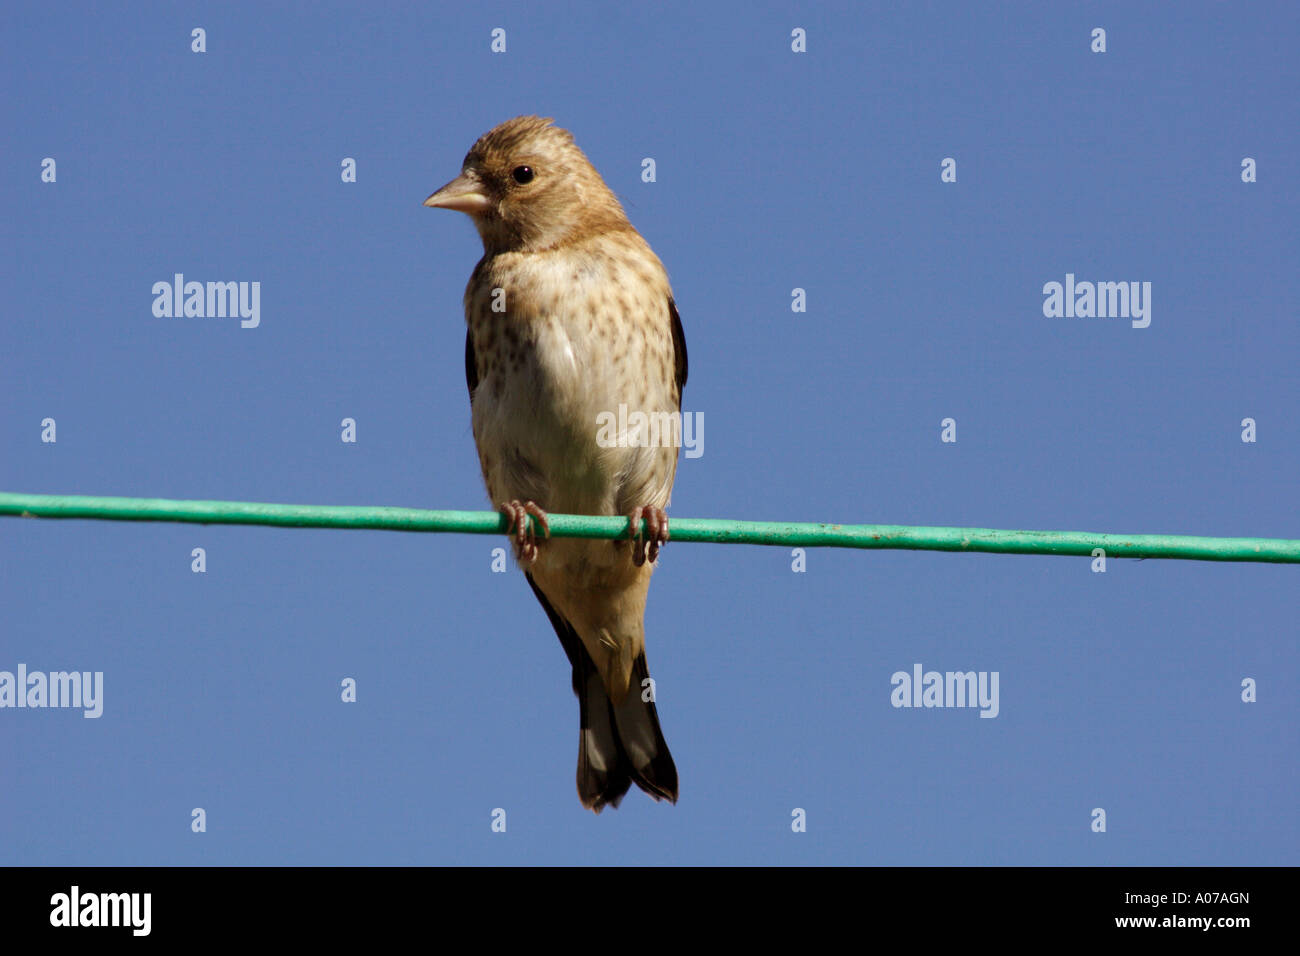 Juvenile Goldfinch, Carduelis carduelis, perched on washing line in a garden, UK. Stock Photo